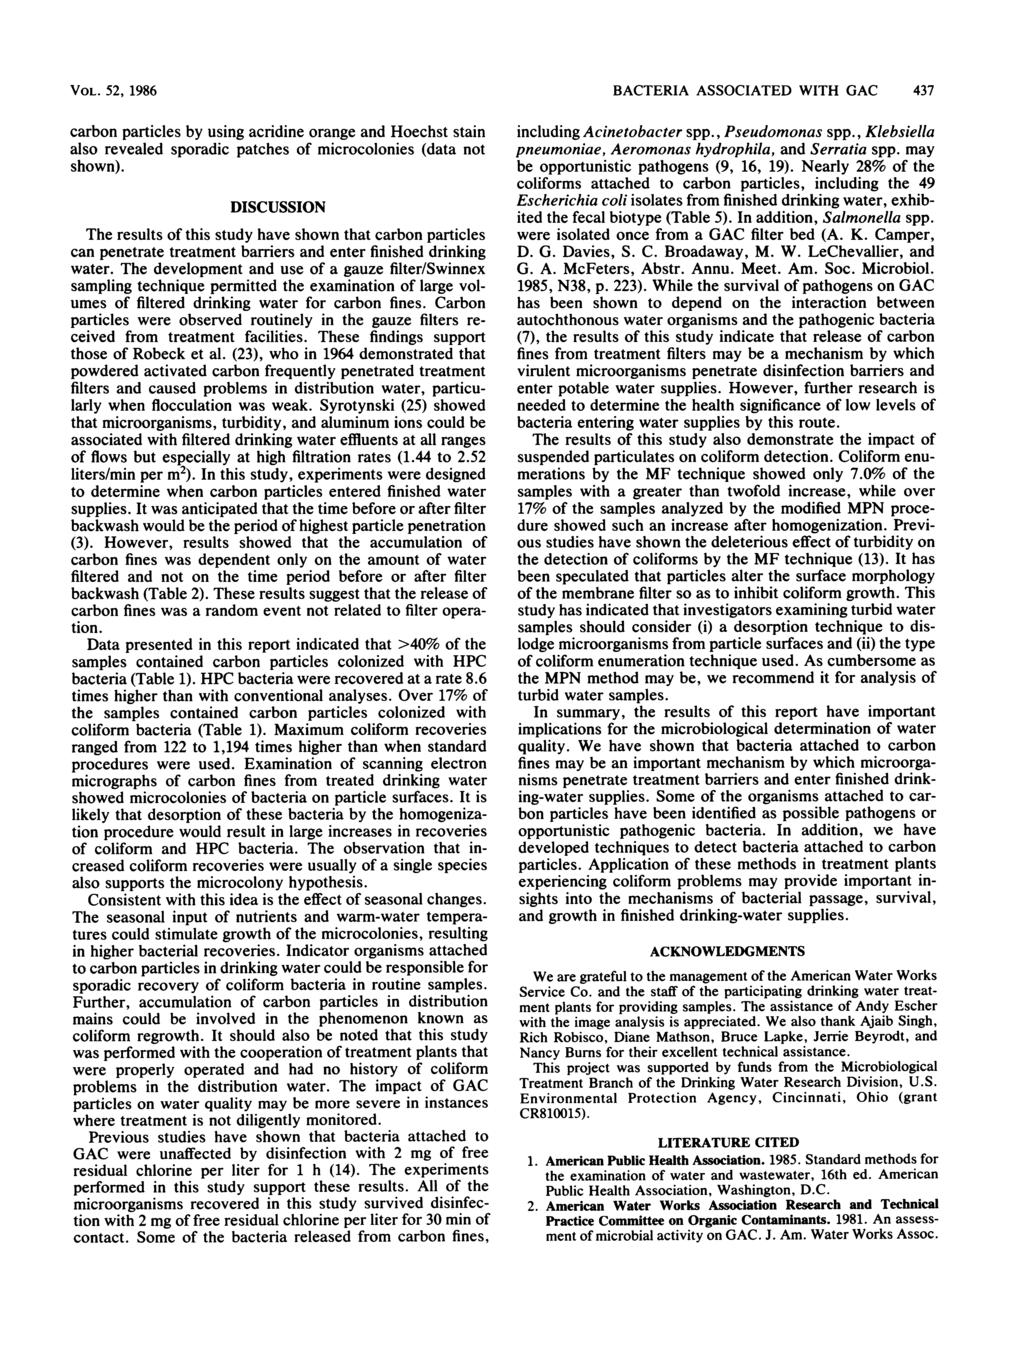 VOL. 52, 1986 crbon prticles by using cridine ornge nd Hoechst stin lso reveled spordic ptches of microcolonies (dt not shown).